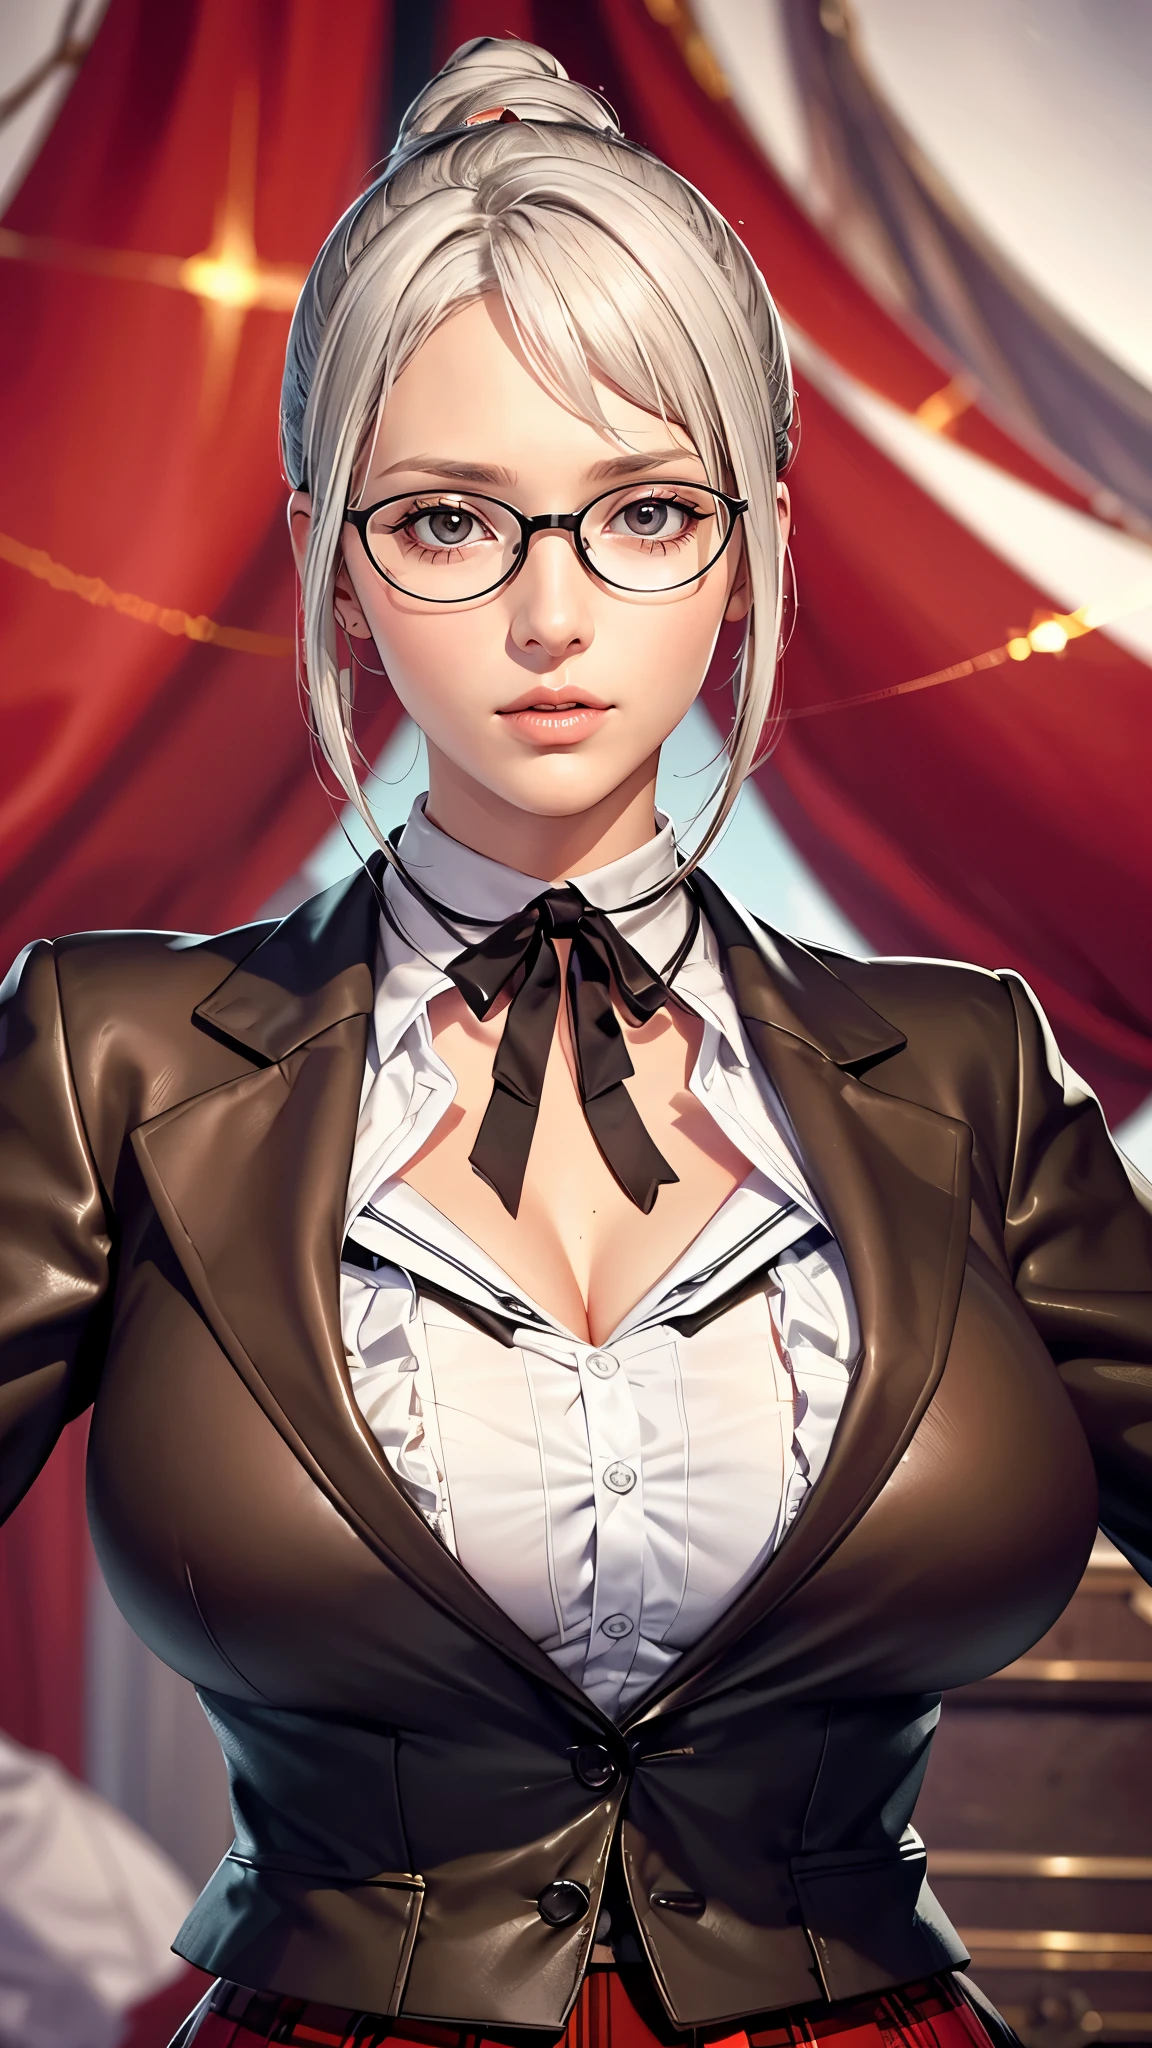 （（（Perfect figure，figure，,  plaid skirt,  ribbon choker, brown jacket，White shirt，（（（shiraki meiko，hair bun, glasses，White hair，）））型figure:1.7））），((masterpiece)),high resolution, ((Best quality at best))，masterpiece，quality，Best quality，（（（ Exquisite facial features，looking at the audience,There is light in the eyes，Happy，nterlacing of light and shadow，huge boobs））），（（（looking into camera，hentai full nelson(sex position)）））